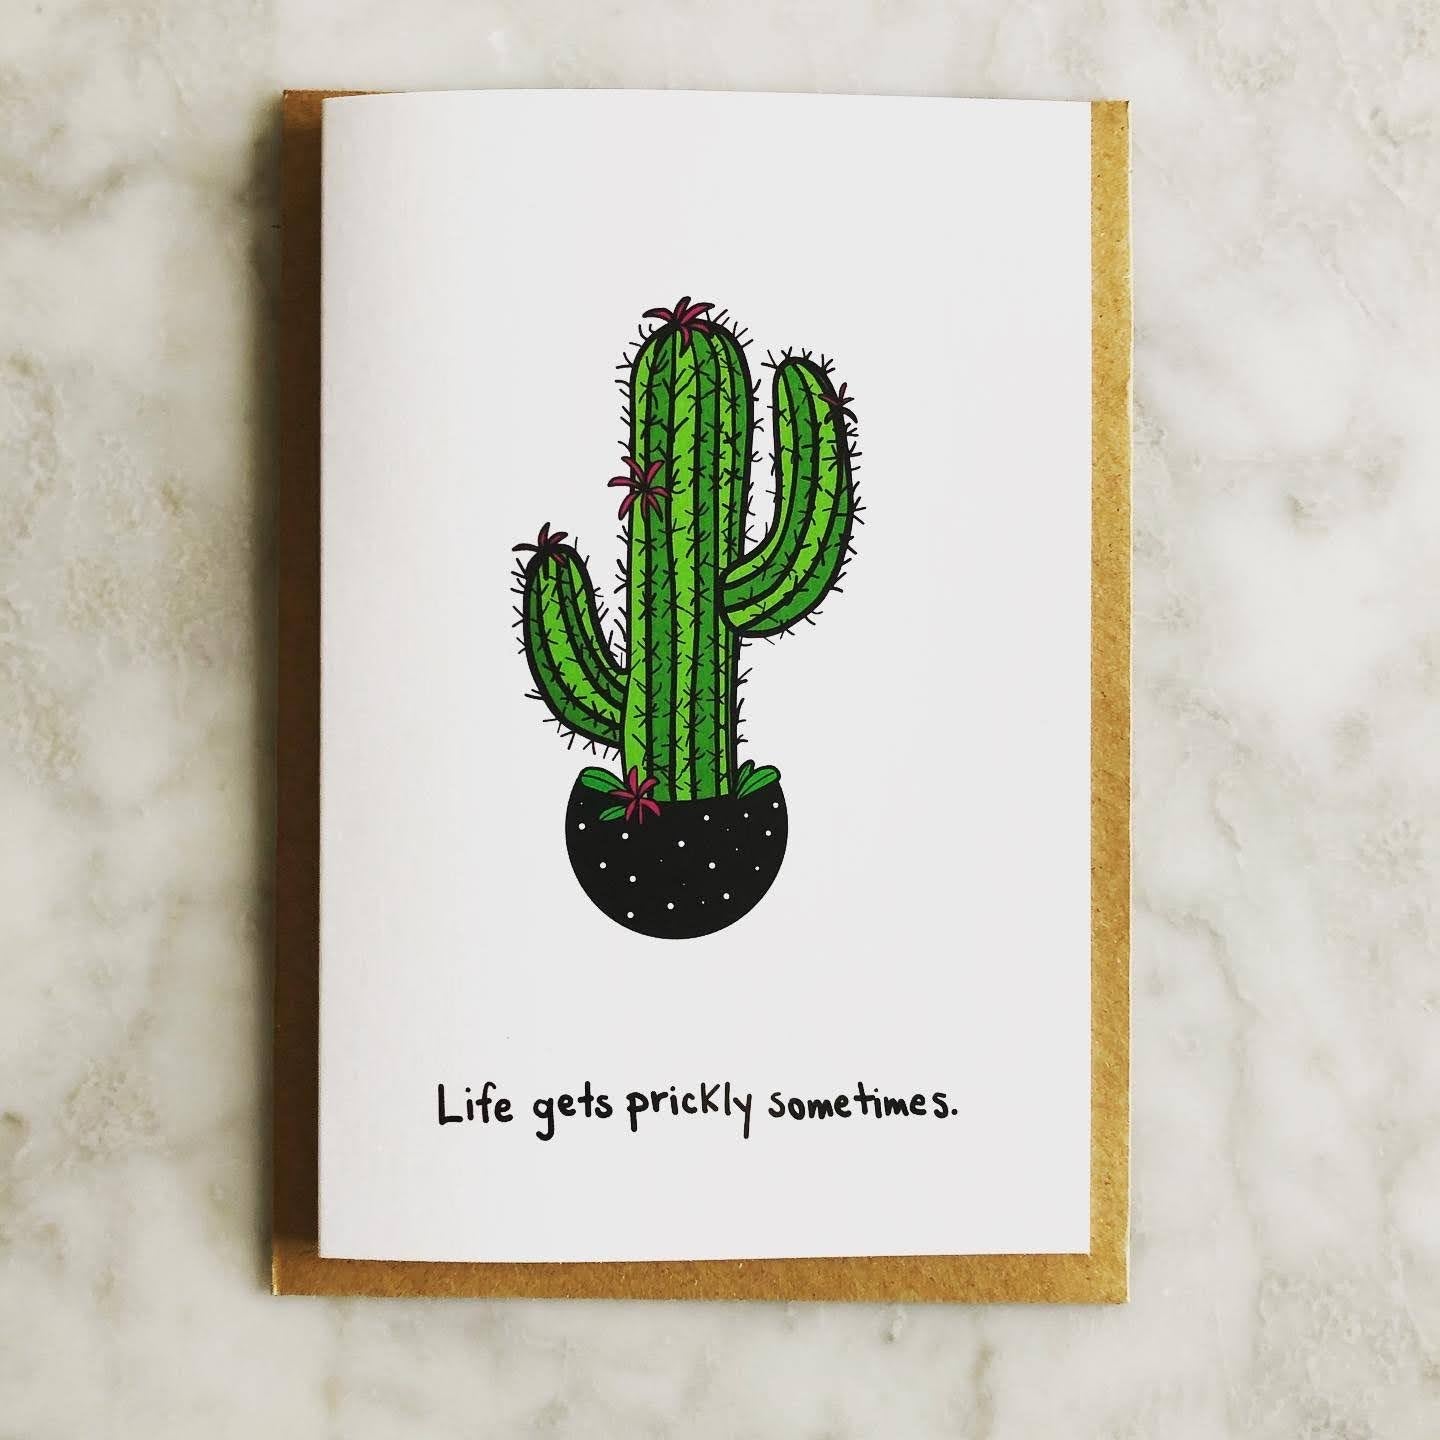 LIFE GETS PRICKLY SOMETIMES